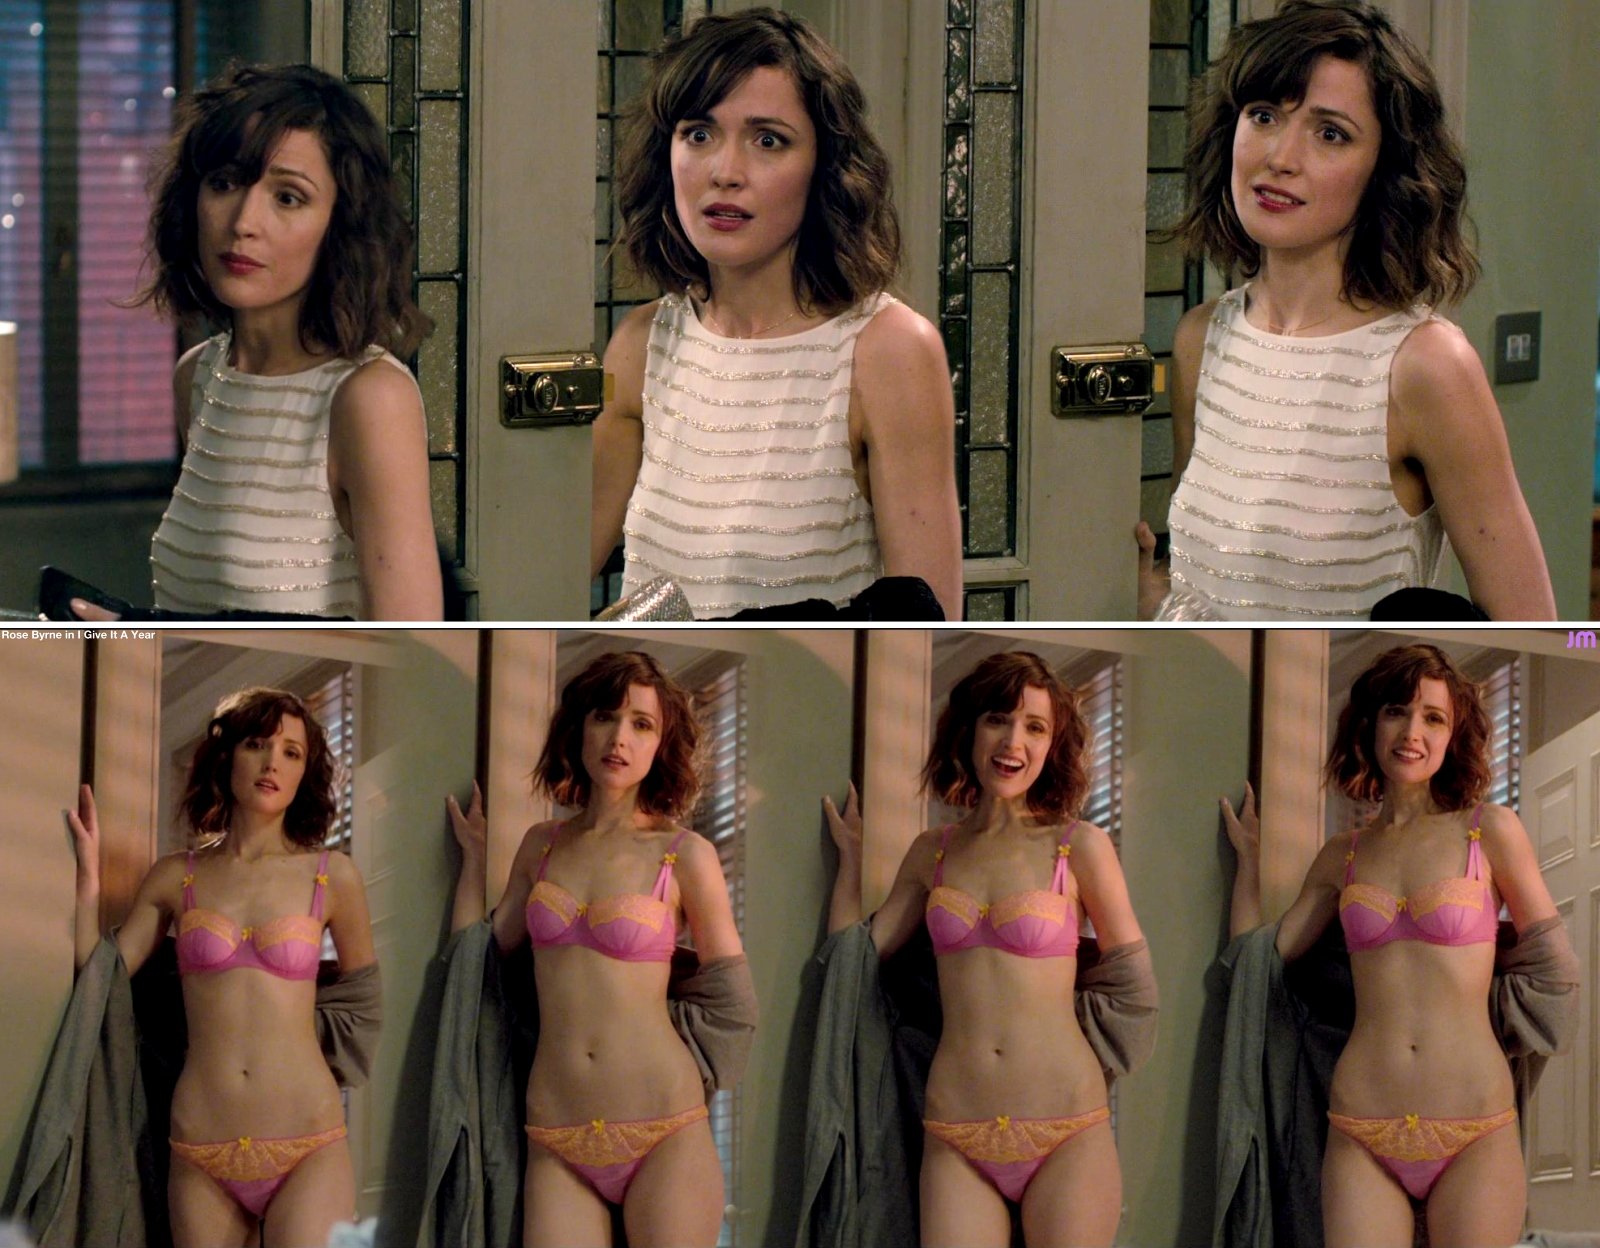 Rose byrne nude pictures